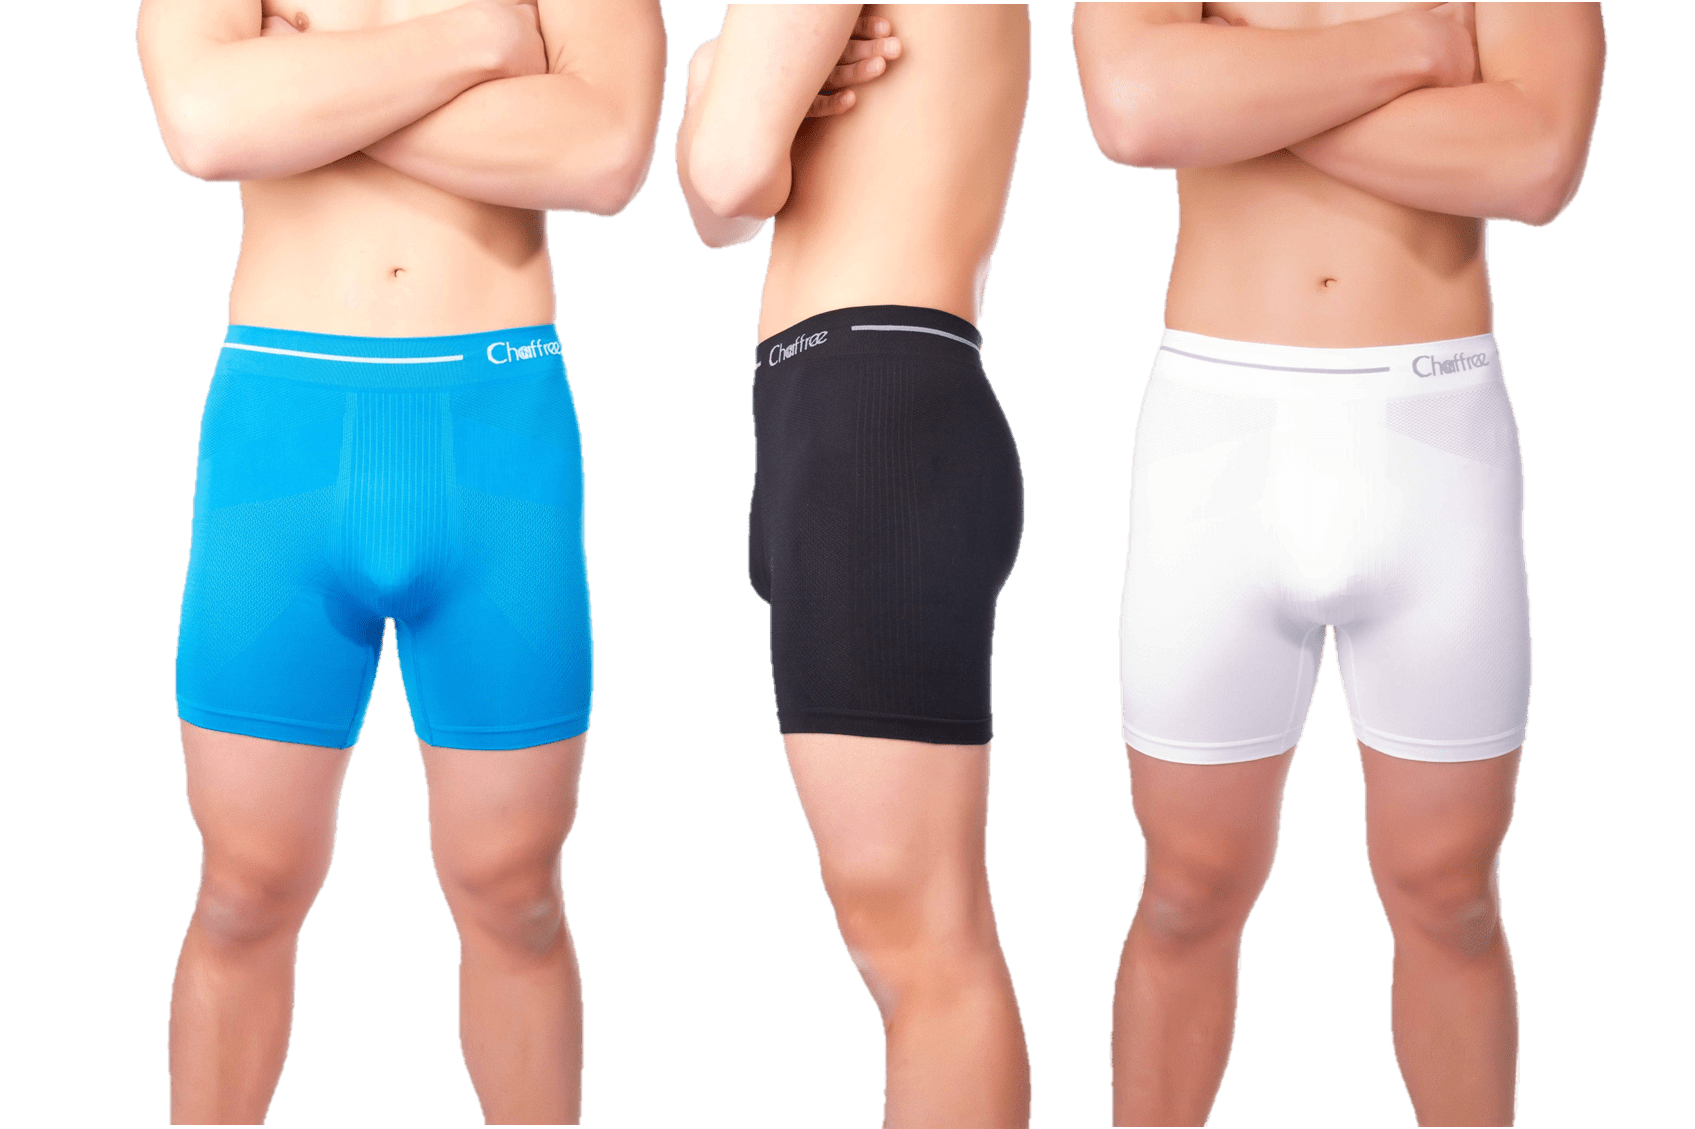 Stretchy Seamless Moisture Wicking Sweat and Chafing Control Sports Gym Exercise Underwear 5 Pack Short & Long Leg Chaffree Mens Briefs Underpants Traditional High Waist Ultra Comfortable Pants 